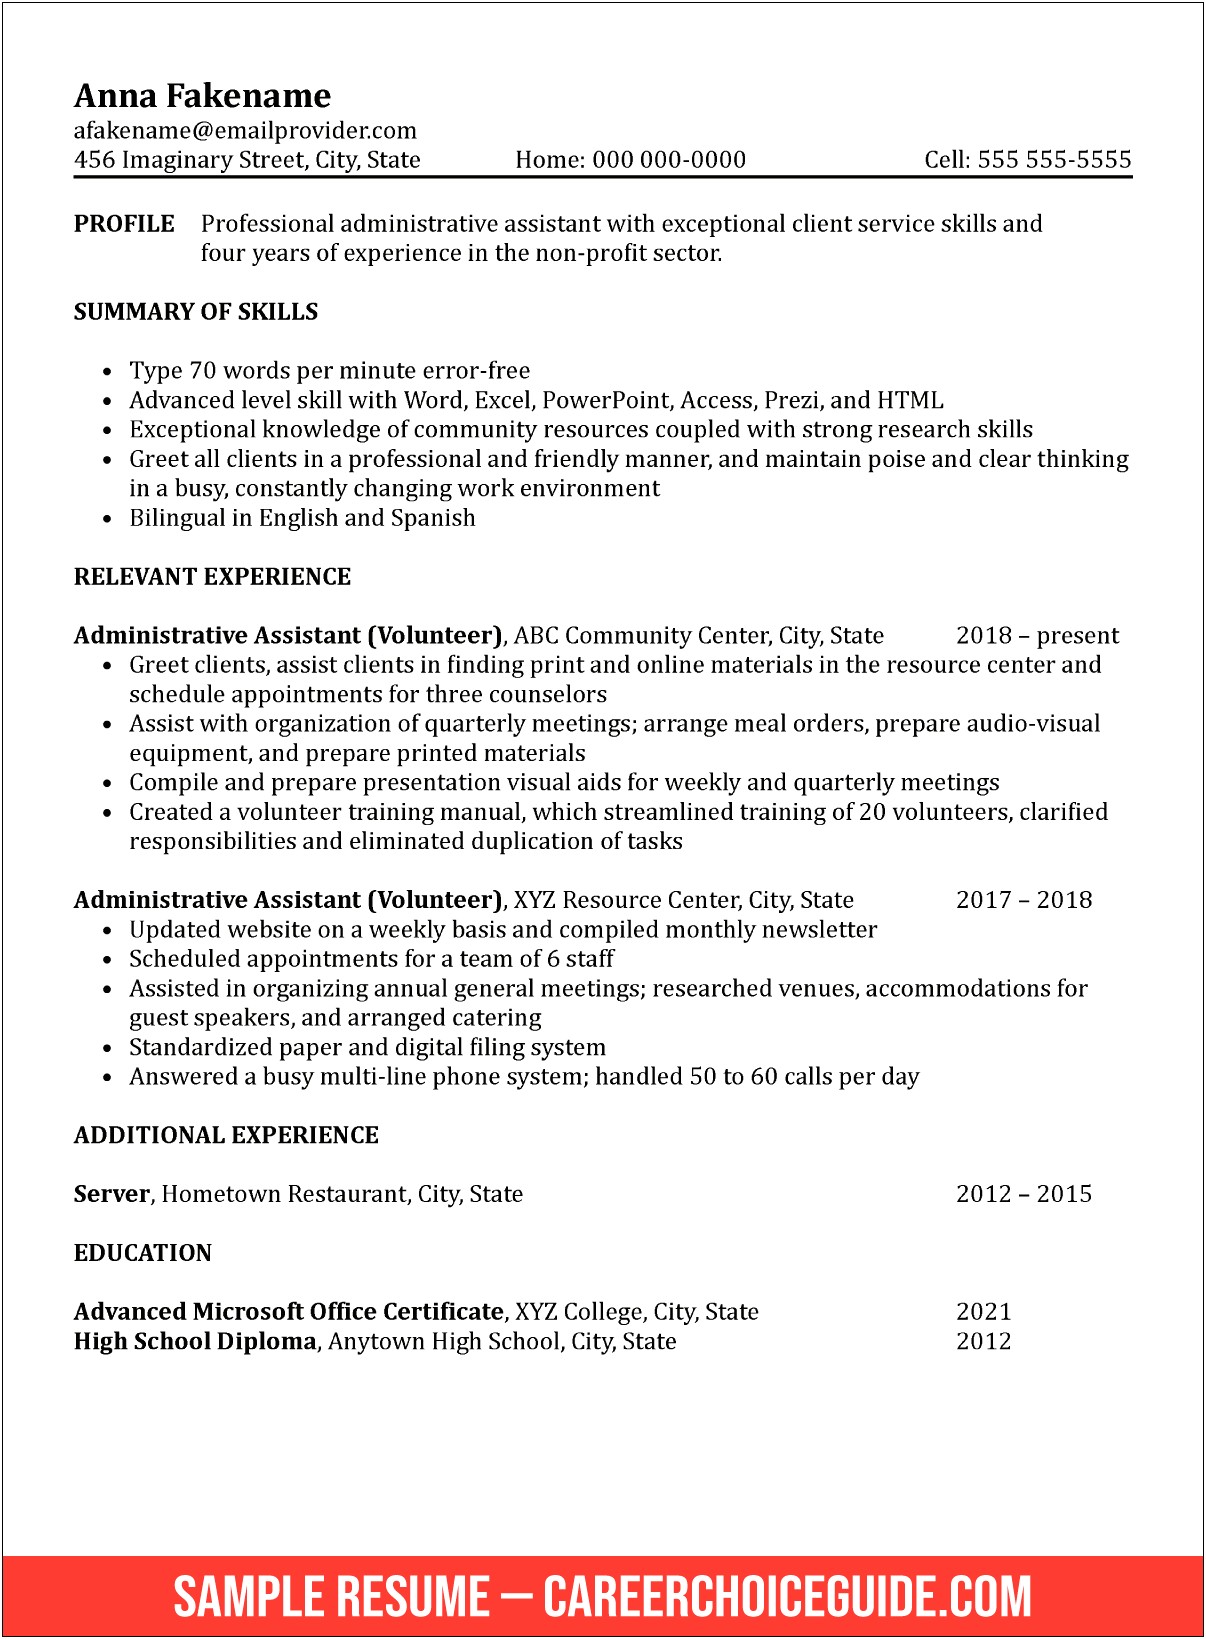 Administrative Assistant Resume With Little Experience